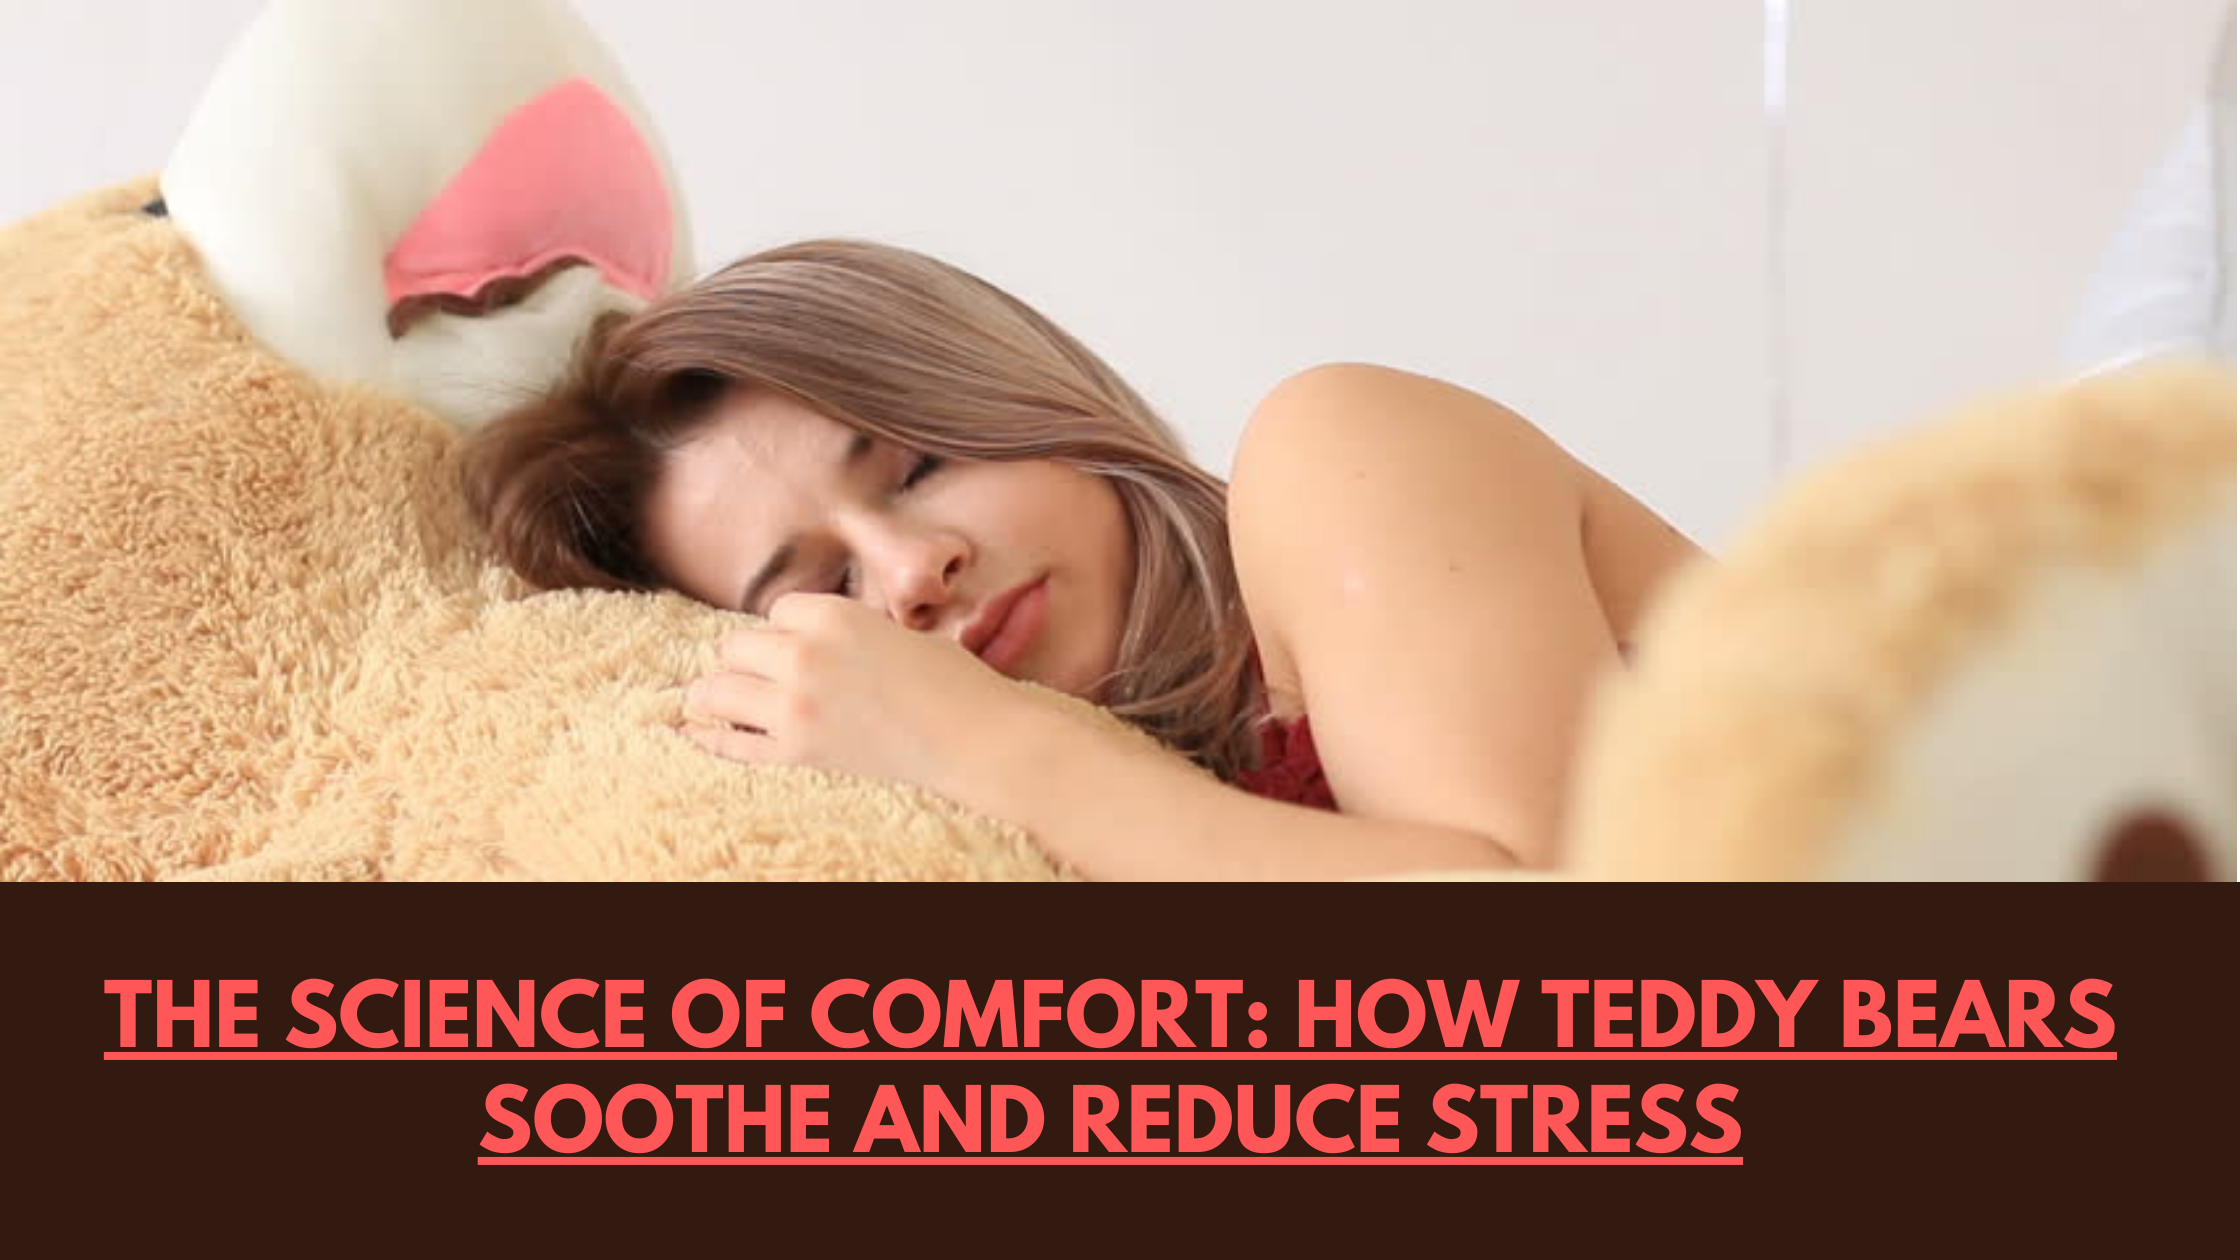 The Science of Comfort: How Teddy Bears Soothe and Reduce Stress